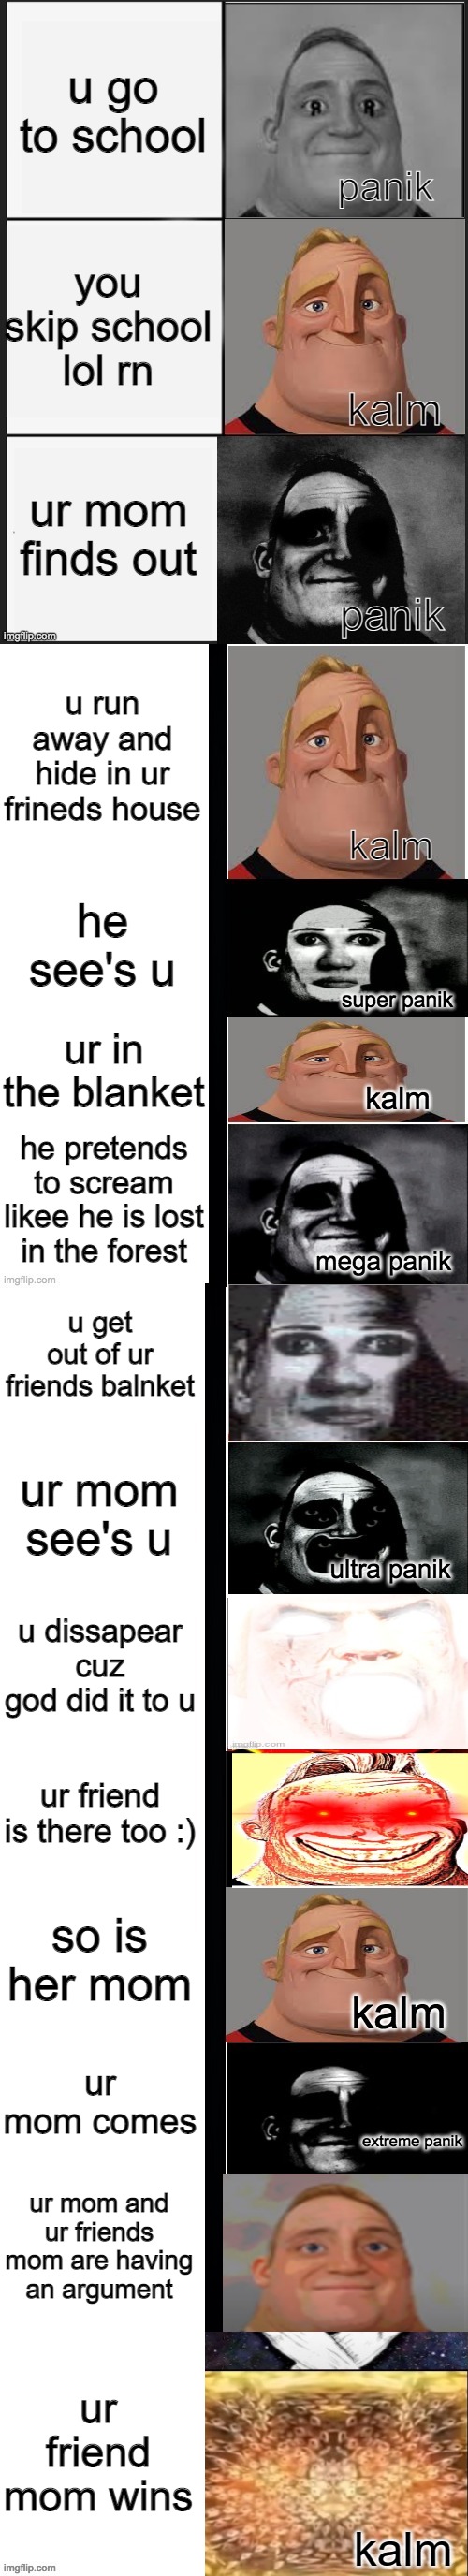 ur mom stupid |  u go to school; you skip school lol rn; ur mom finds out; u run away and hide in ur frineds house; he see's u; ur in the blanket; he pretends to scream likee he is lost in the forest; u get out of ur friends balnket; ur mom see's u; u dissapear cuz god did it to u; ur friend is there too :); so is her mom; ur mom comes; ur mom and ur friends mom are having an argument; ur friend mom wins; kalm | image tagged in panik kalm panik mr incredible 2nd extended | made w/ Imgflip meme maker